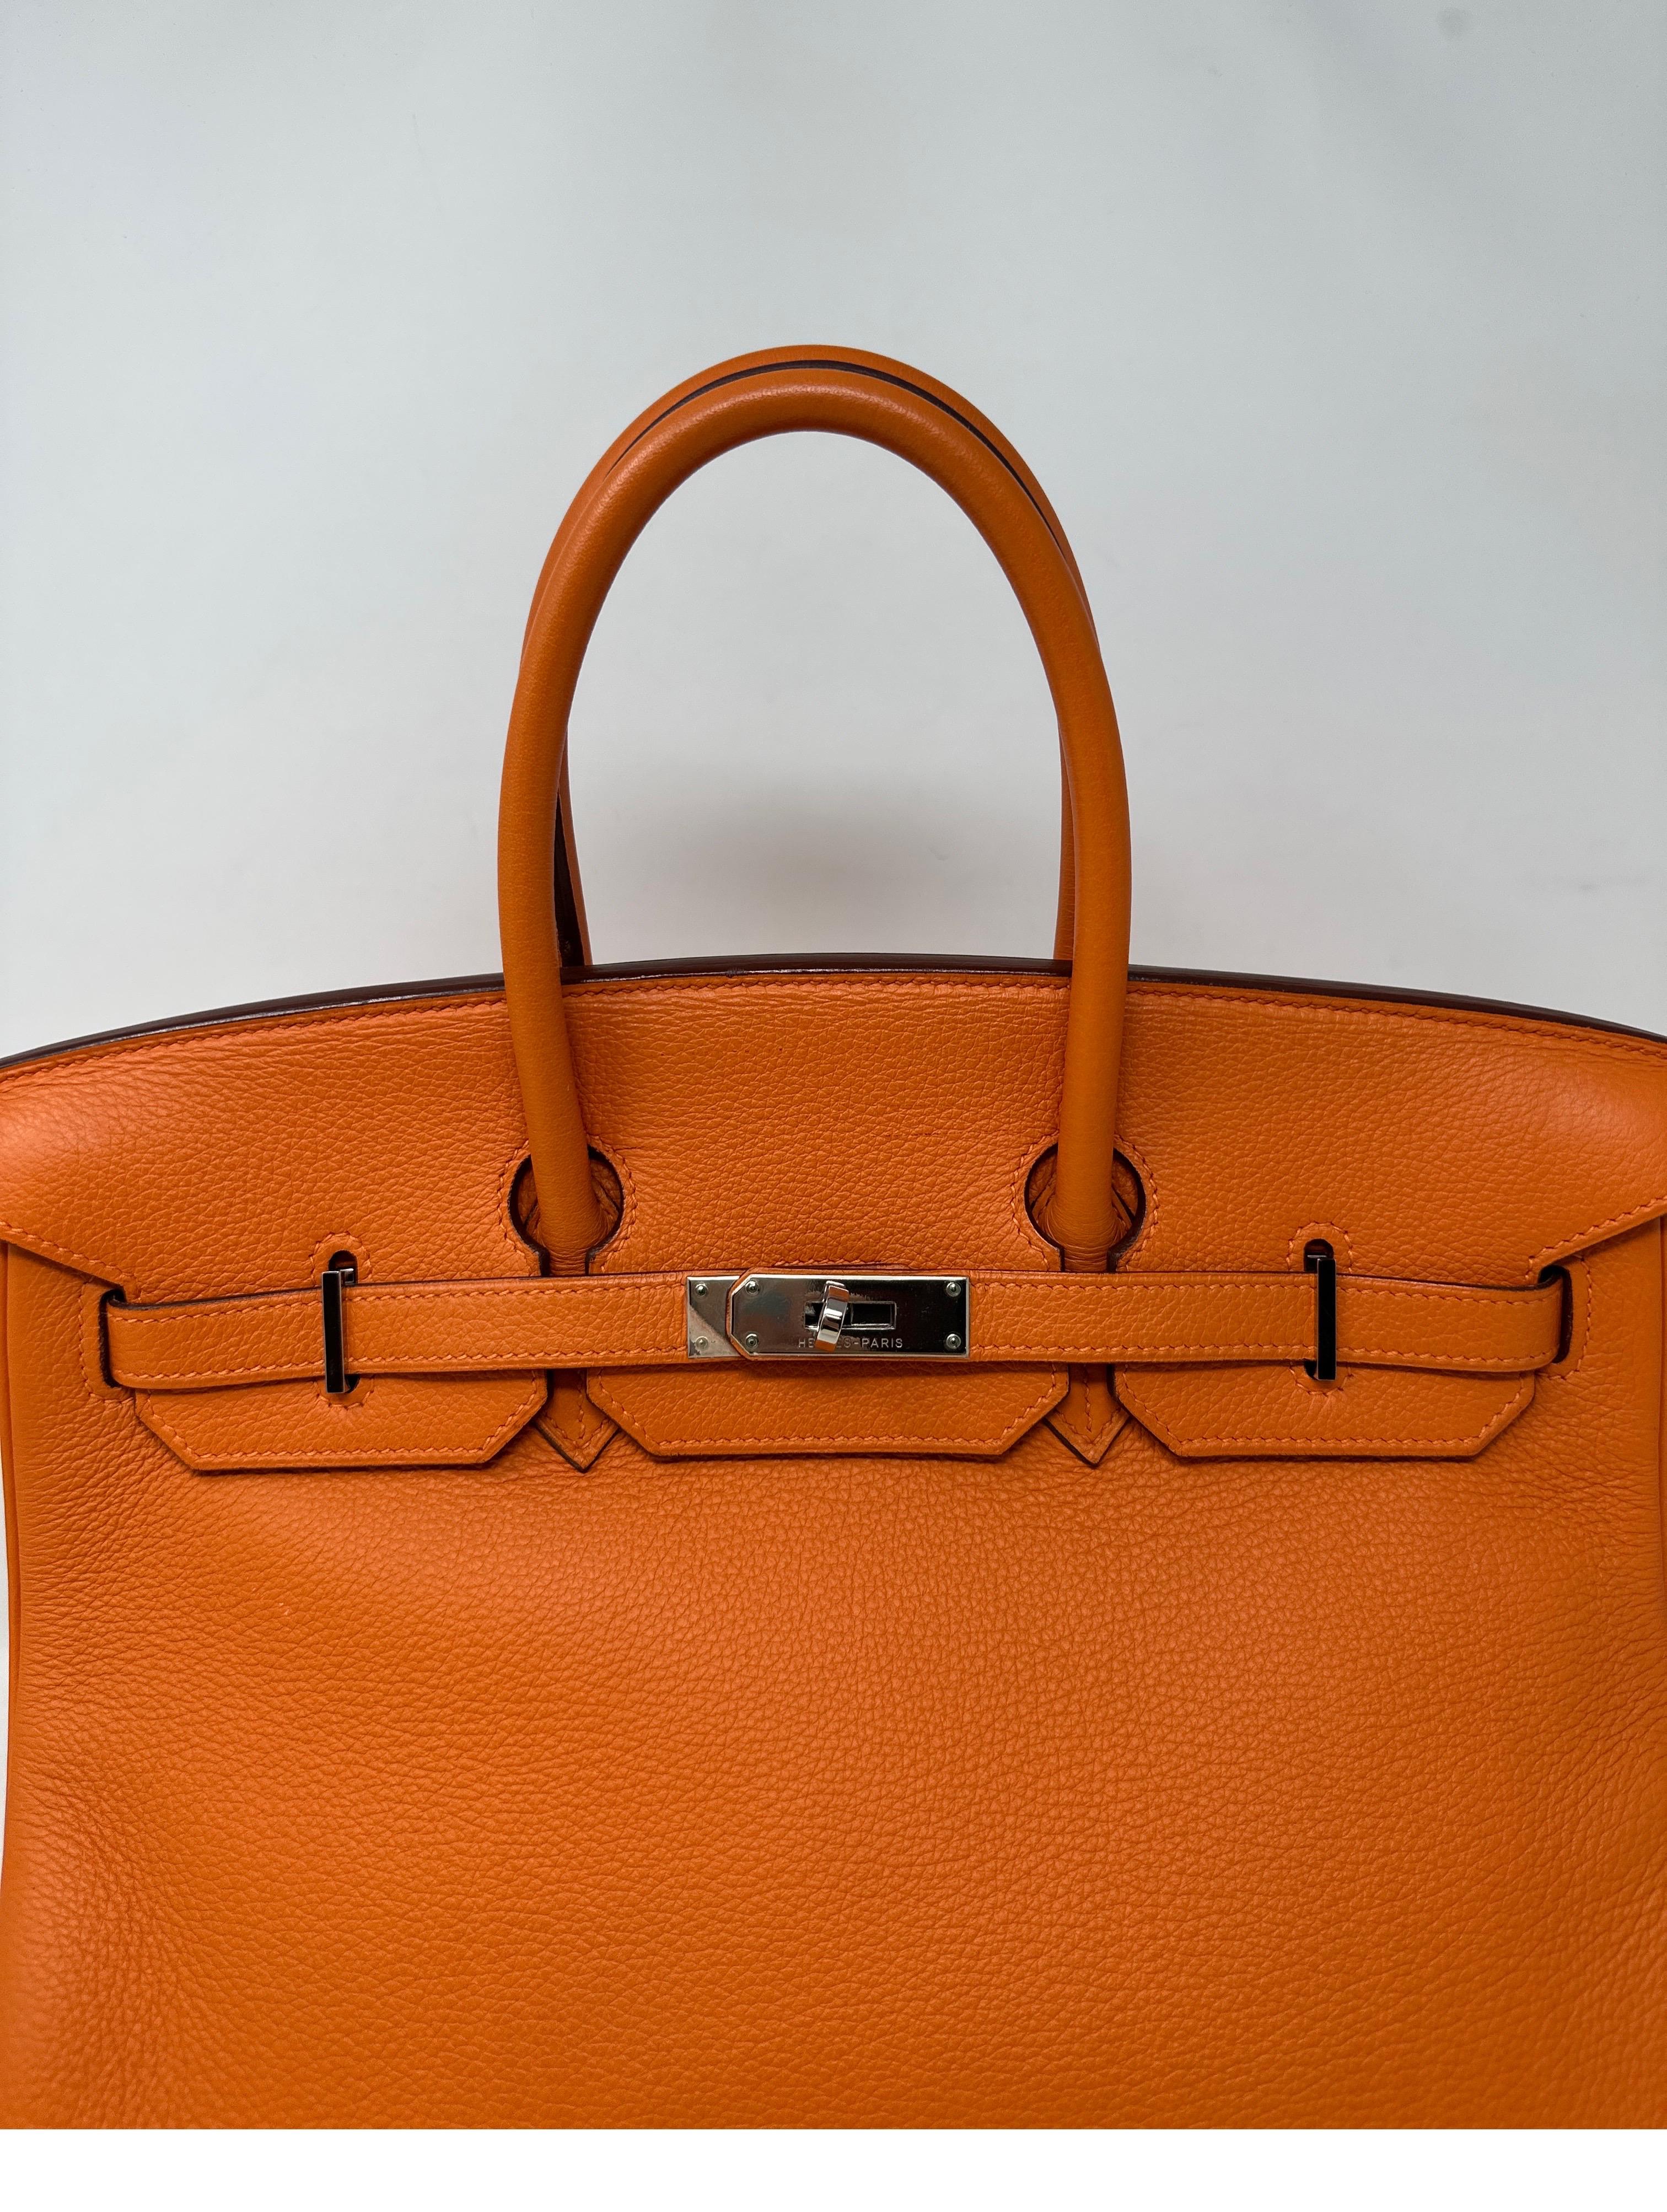 Hermes Orange Birkin 35 Bag. Excellent condition. Palladium hardware. Interior clean. Looks like new. Classic orange color from Hermes. Includes clochette, lock, keys, and dust bag. Guaranteed authentic. 